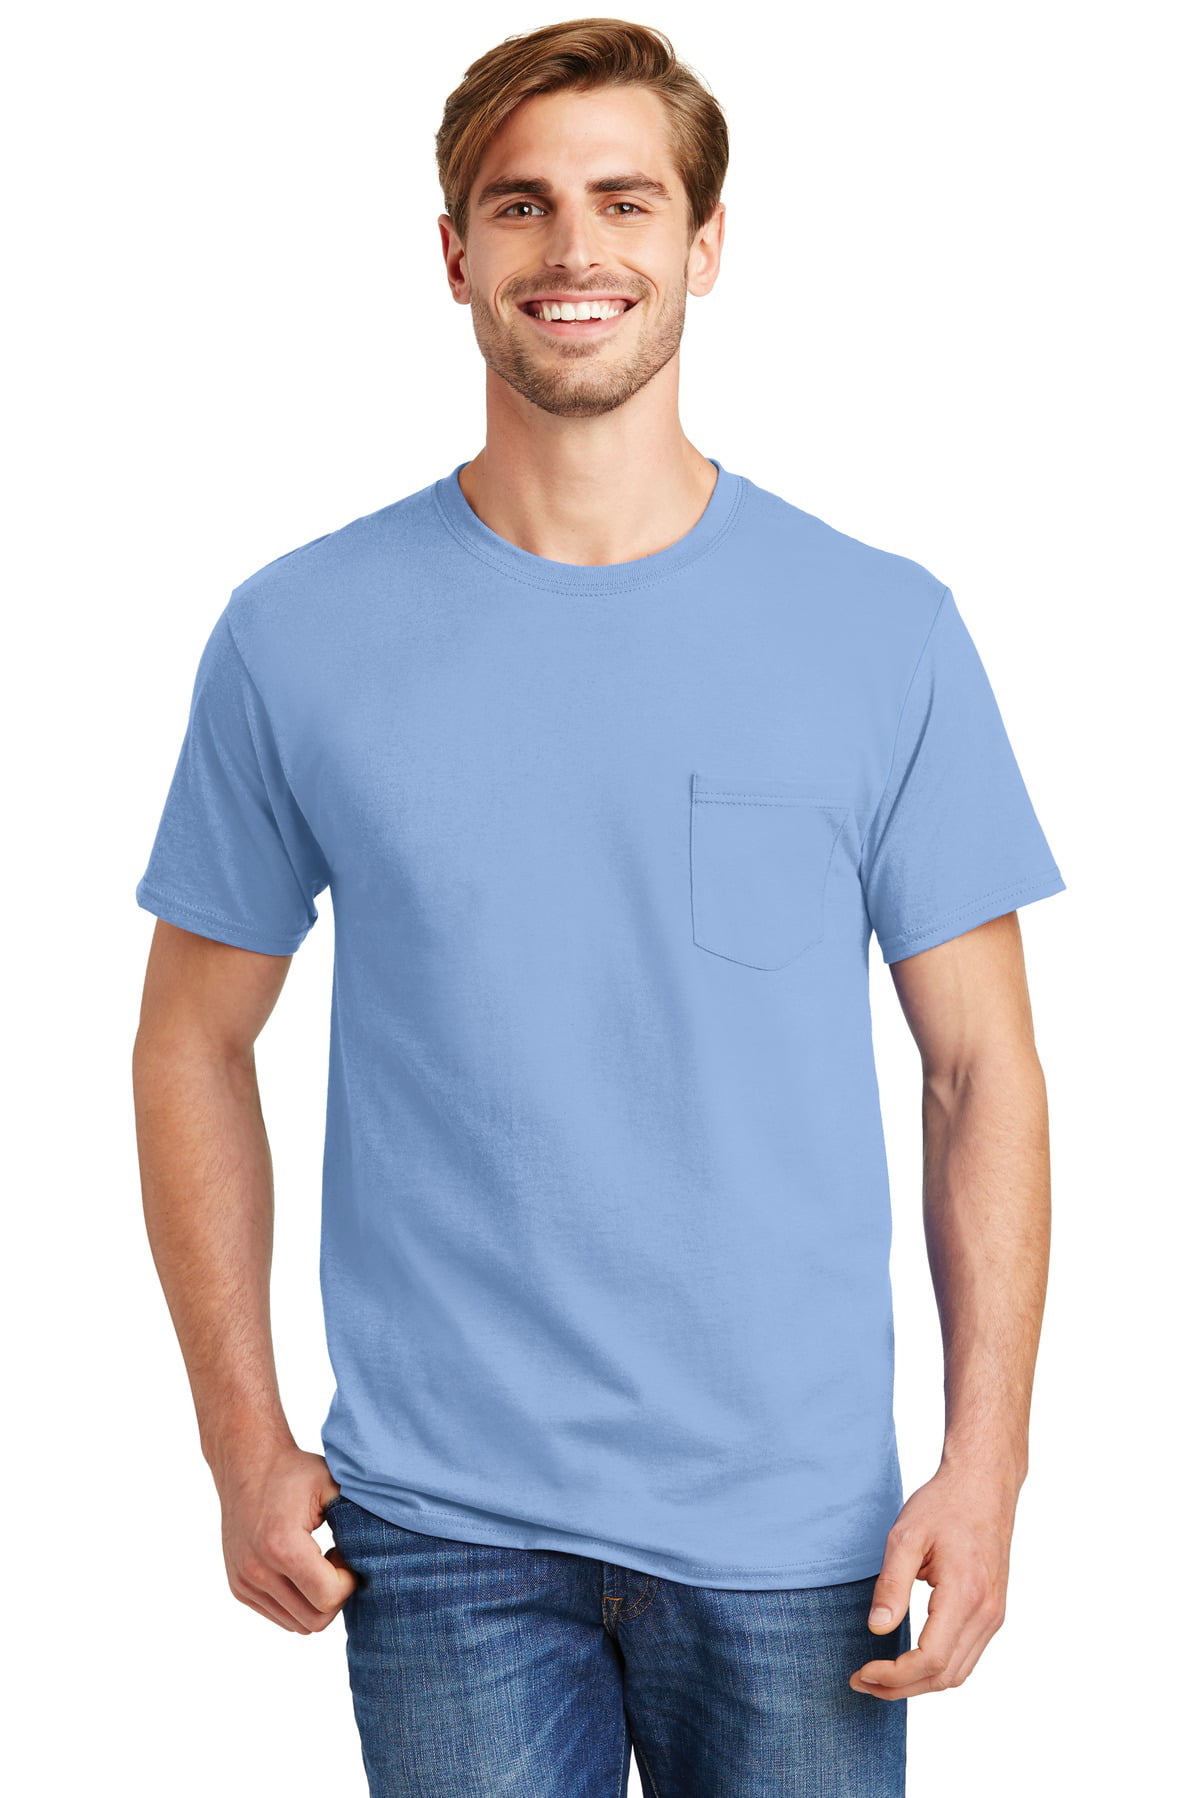 Hanes Tagless 100% Cotton T-Shirt with Pocket 